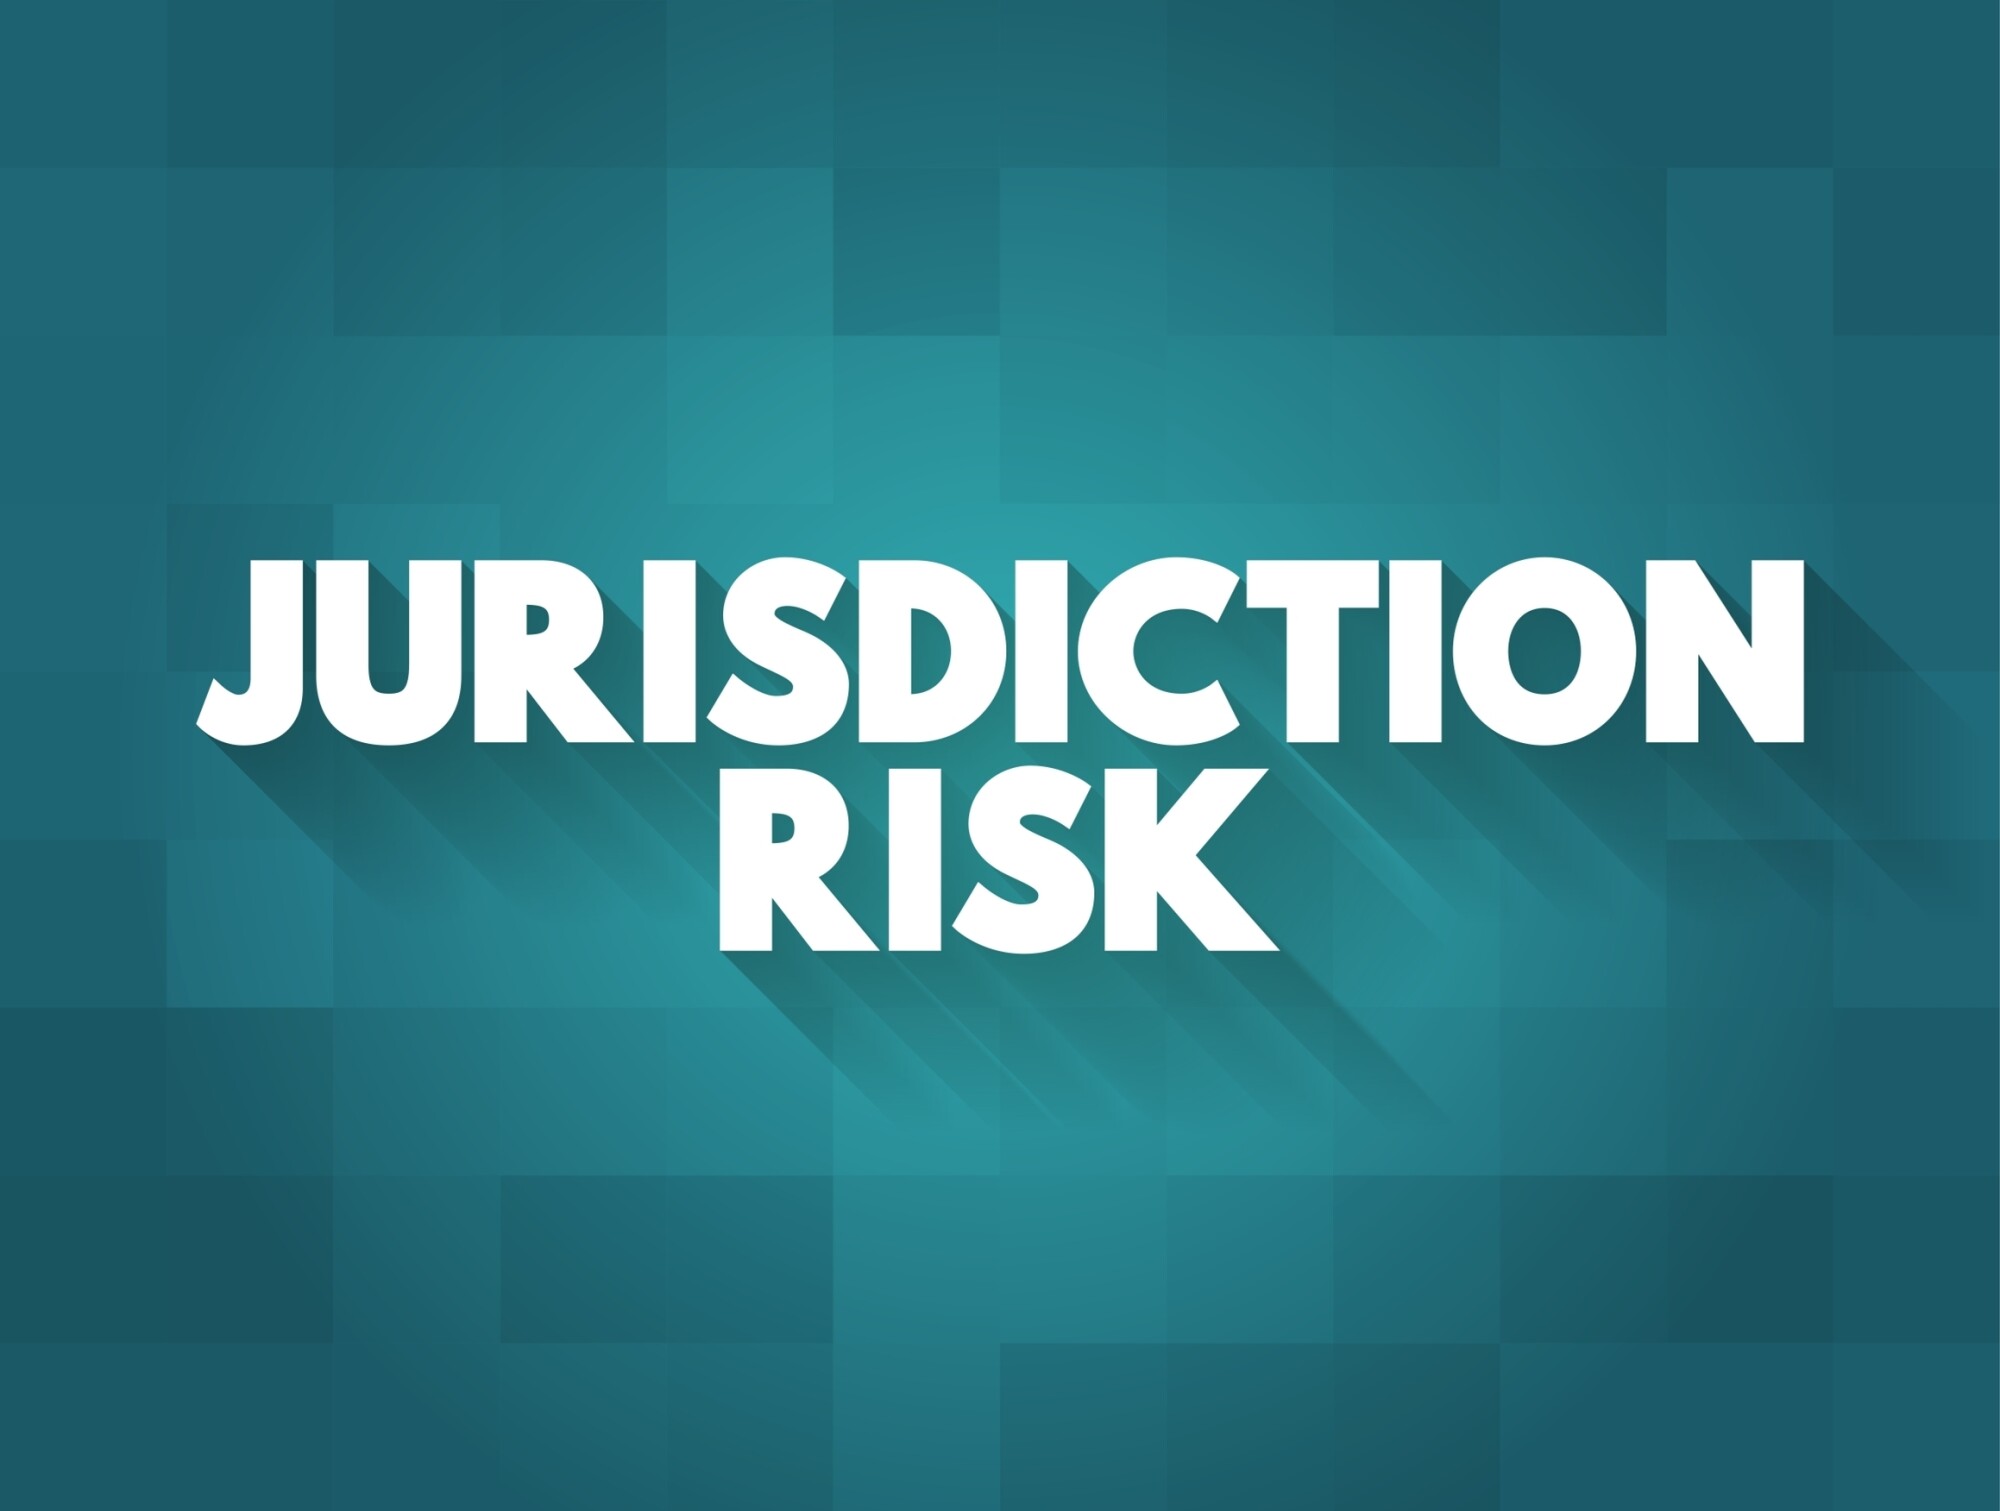 JURISDICTION RISK in white over a teal background